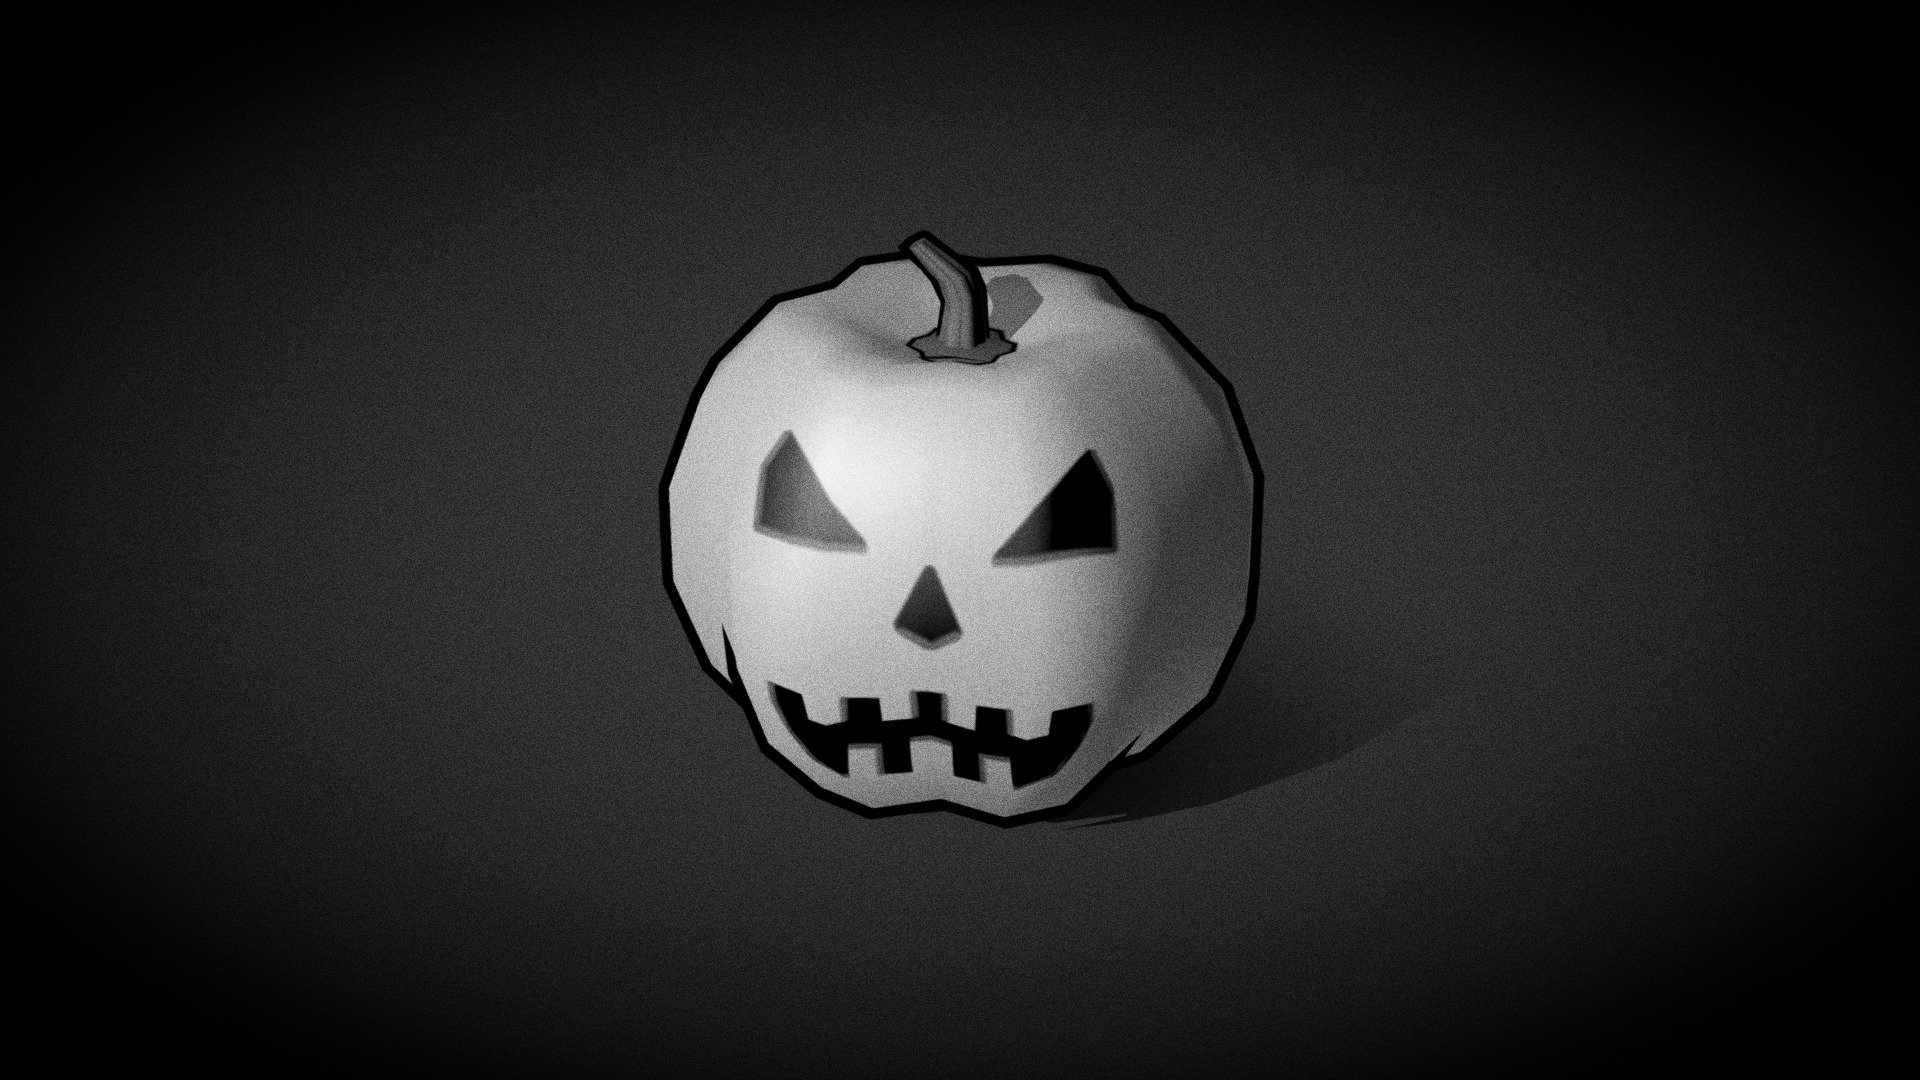 Cartoon halloween pumpkin in black and white style with a lot of grain, like old times.

Software used: Maya, Photoshop, and 3D Coat 3d model